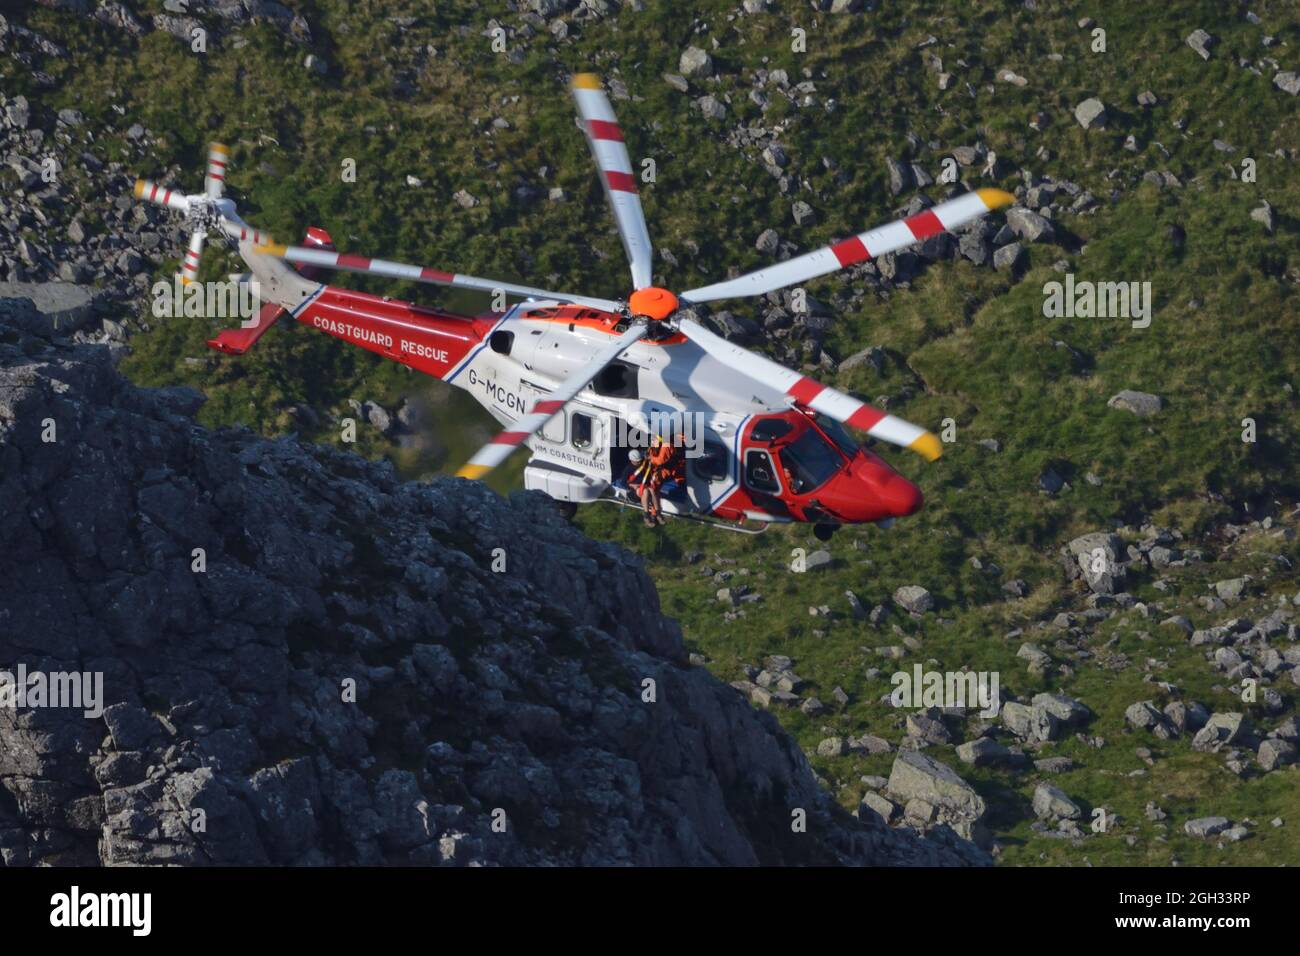 An AW189 helicopter of Her Majesty's coastguard carrying out a mountain rescue on the north face of Ben Nevis, Scottish Highlands, UK Stock Photo